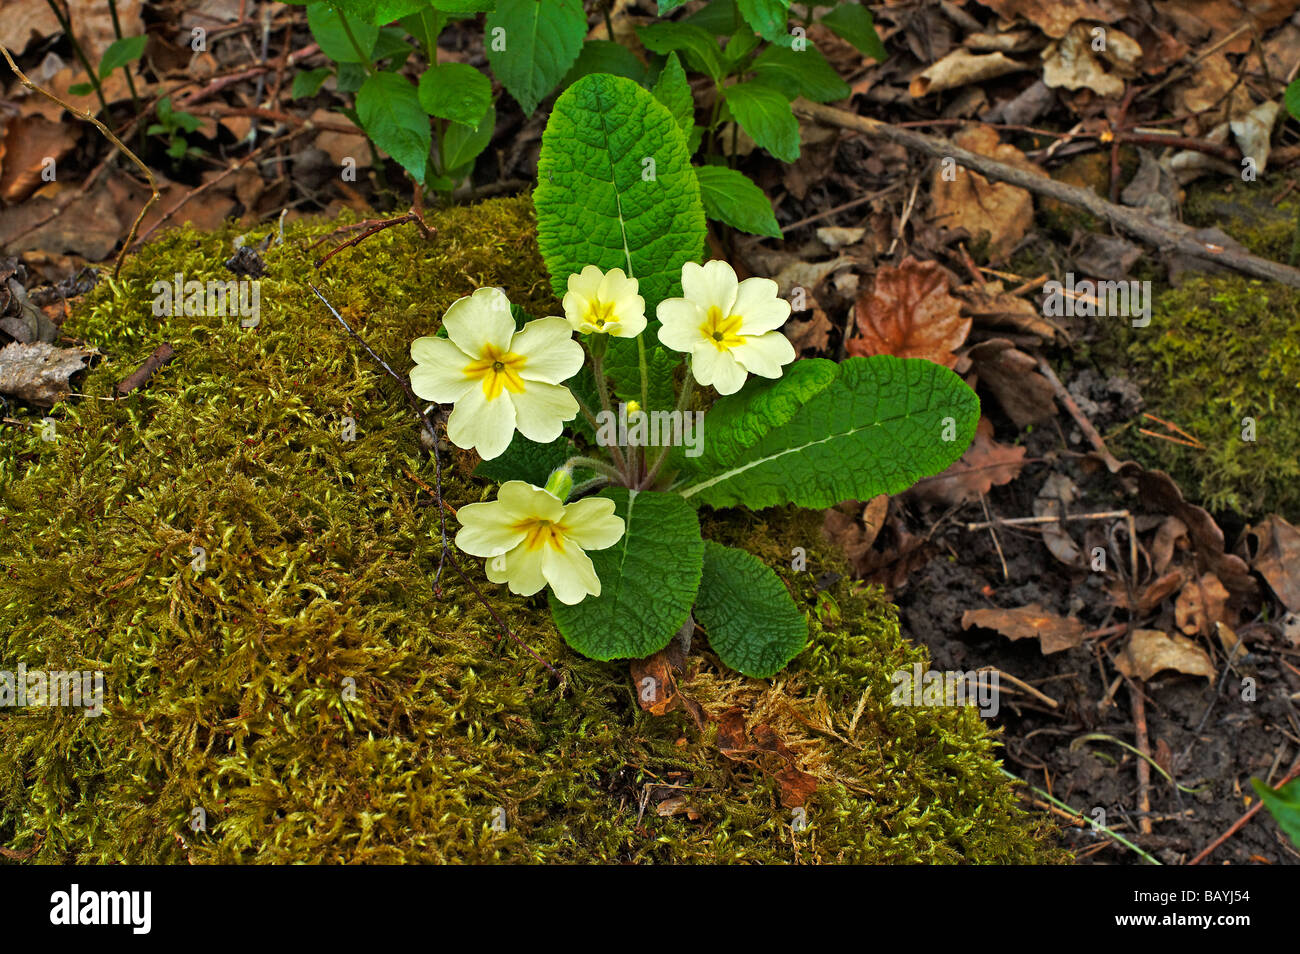 Primroses growing on the edge of a moss covered rock Stock Photo